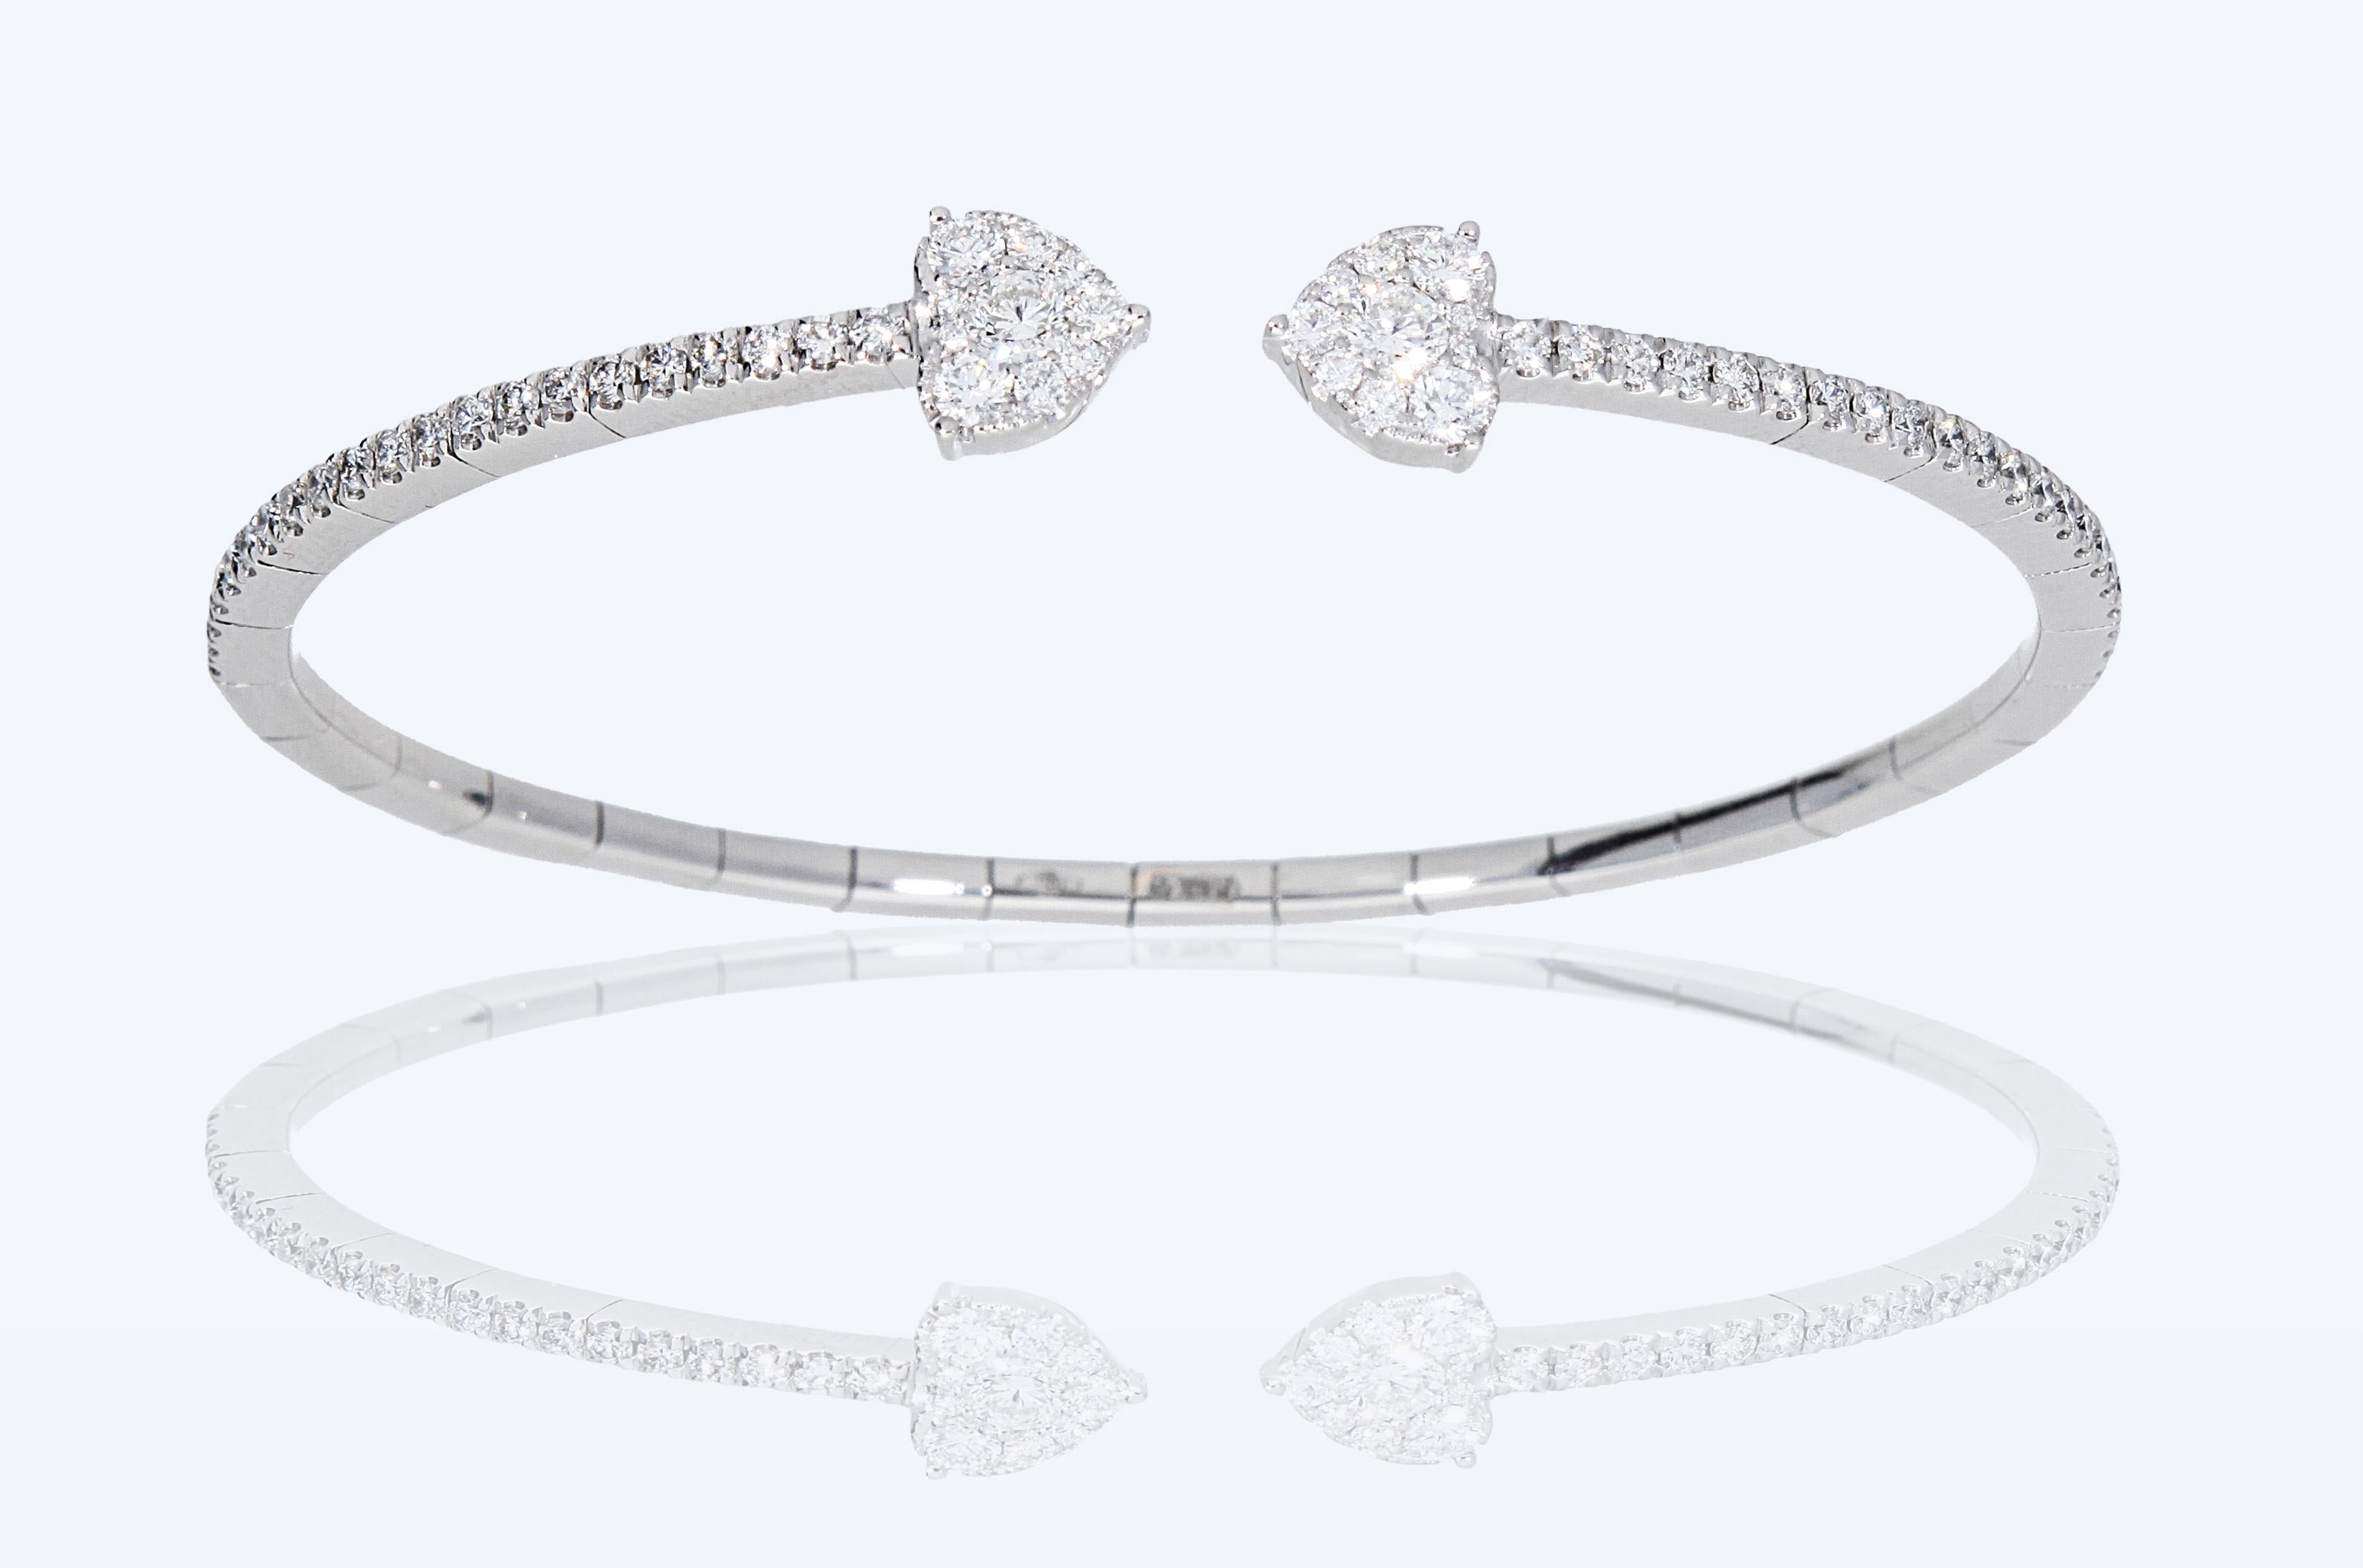 Rigid spring bracelet, with heart-shaped ends. 
The bracelet is made up of a row of diamonds with a final heart with pavé diamonds.
The total carat weight of the diamonds is 1.14 ct.
The bracelet is in 18 Kt white gold

•THE MANUFACTURE IS MADE IN